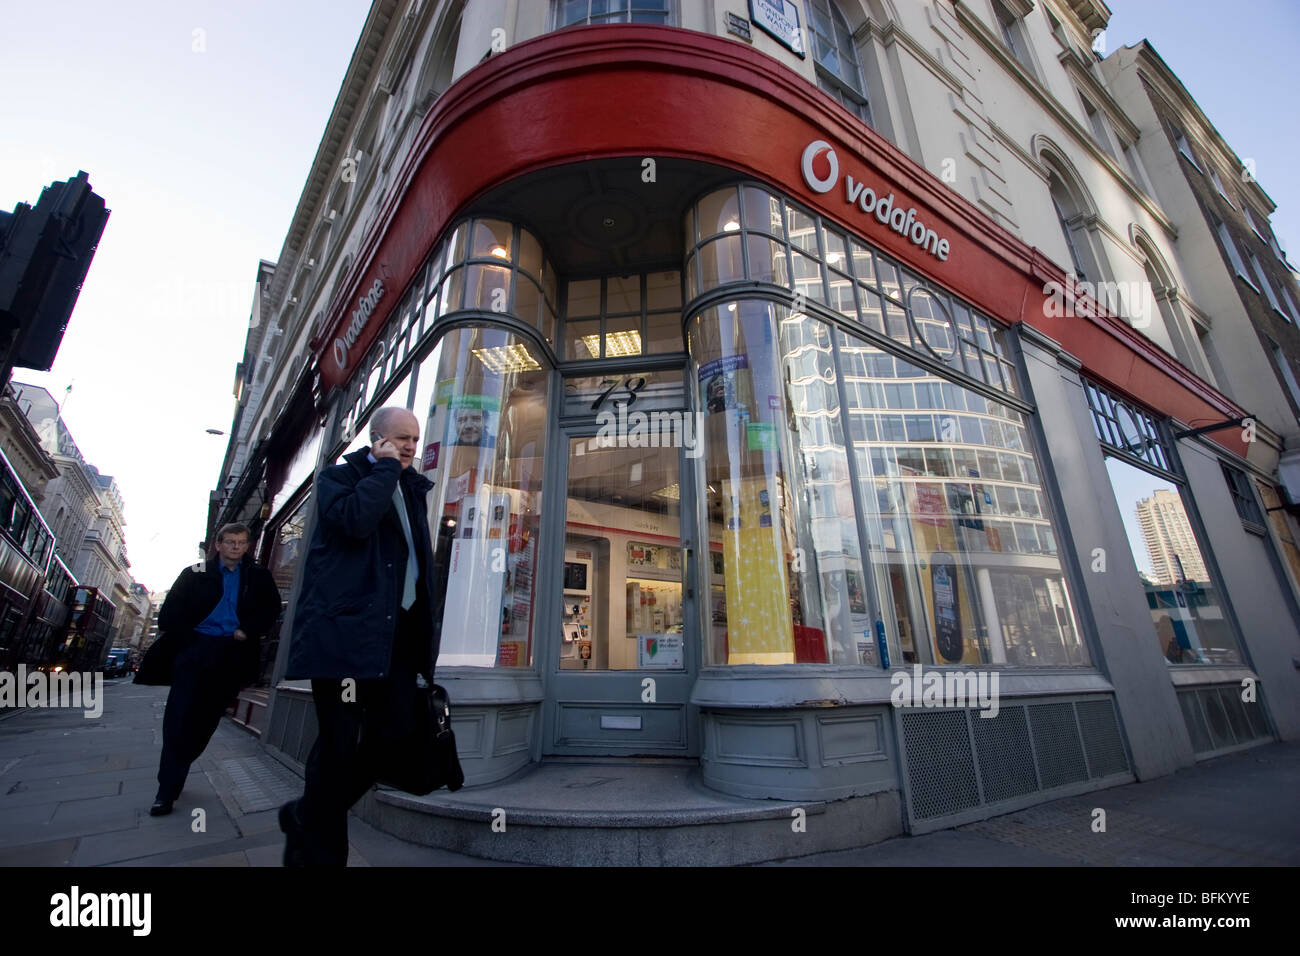 Vodafone mobile phone outlet, central London Stock Photo